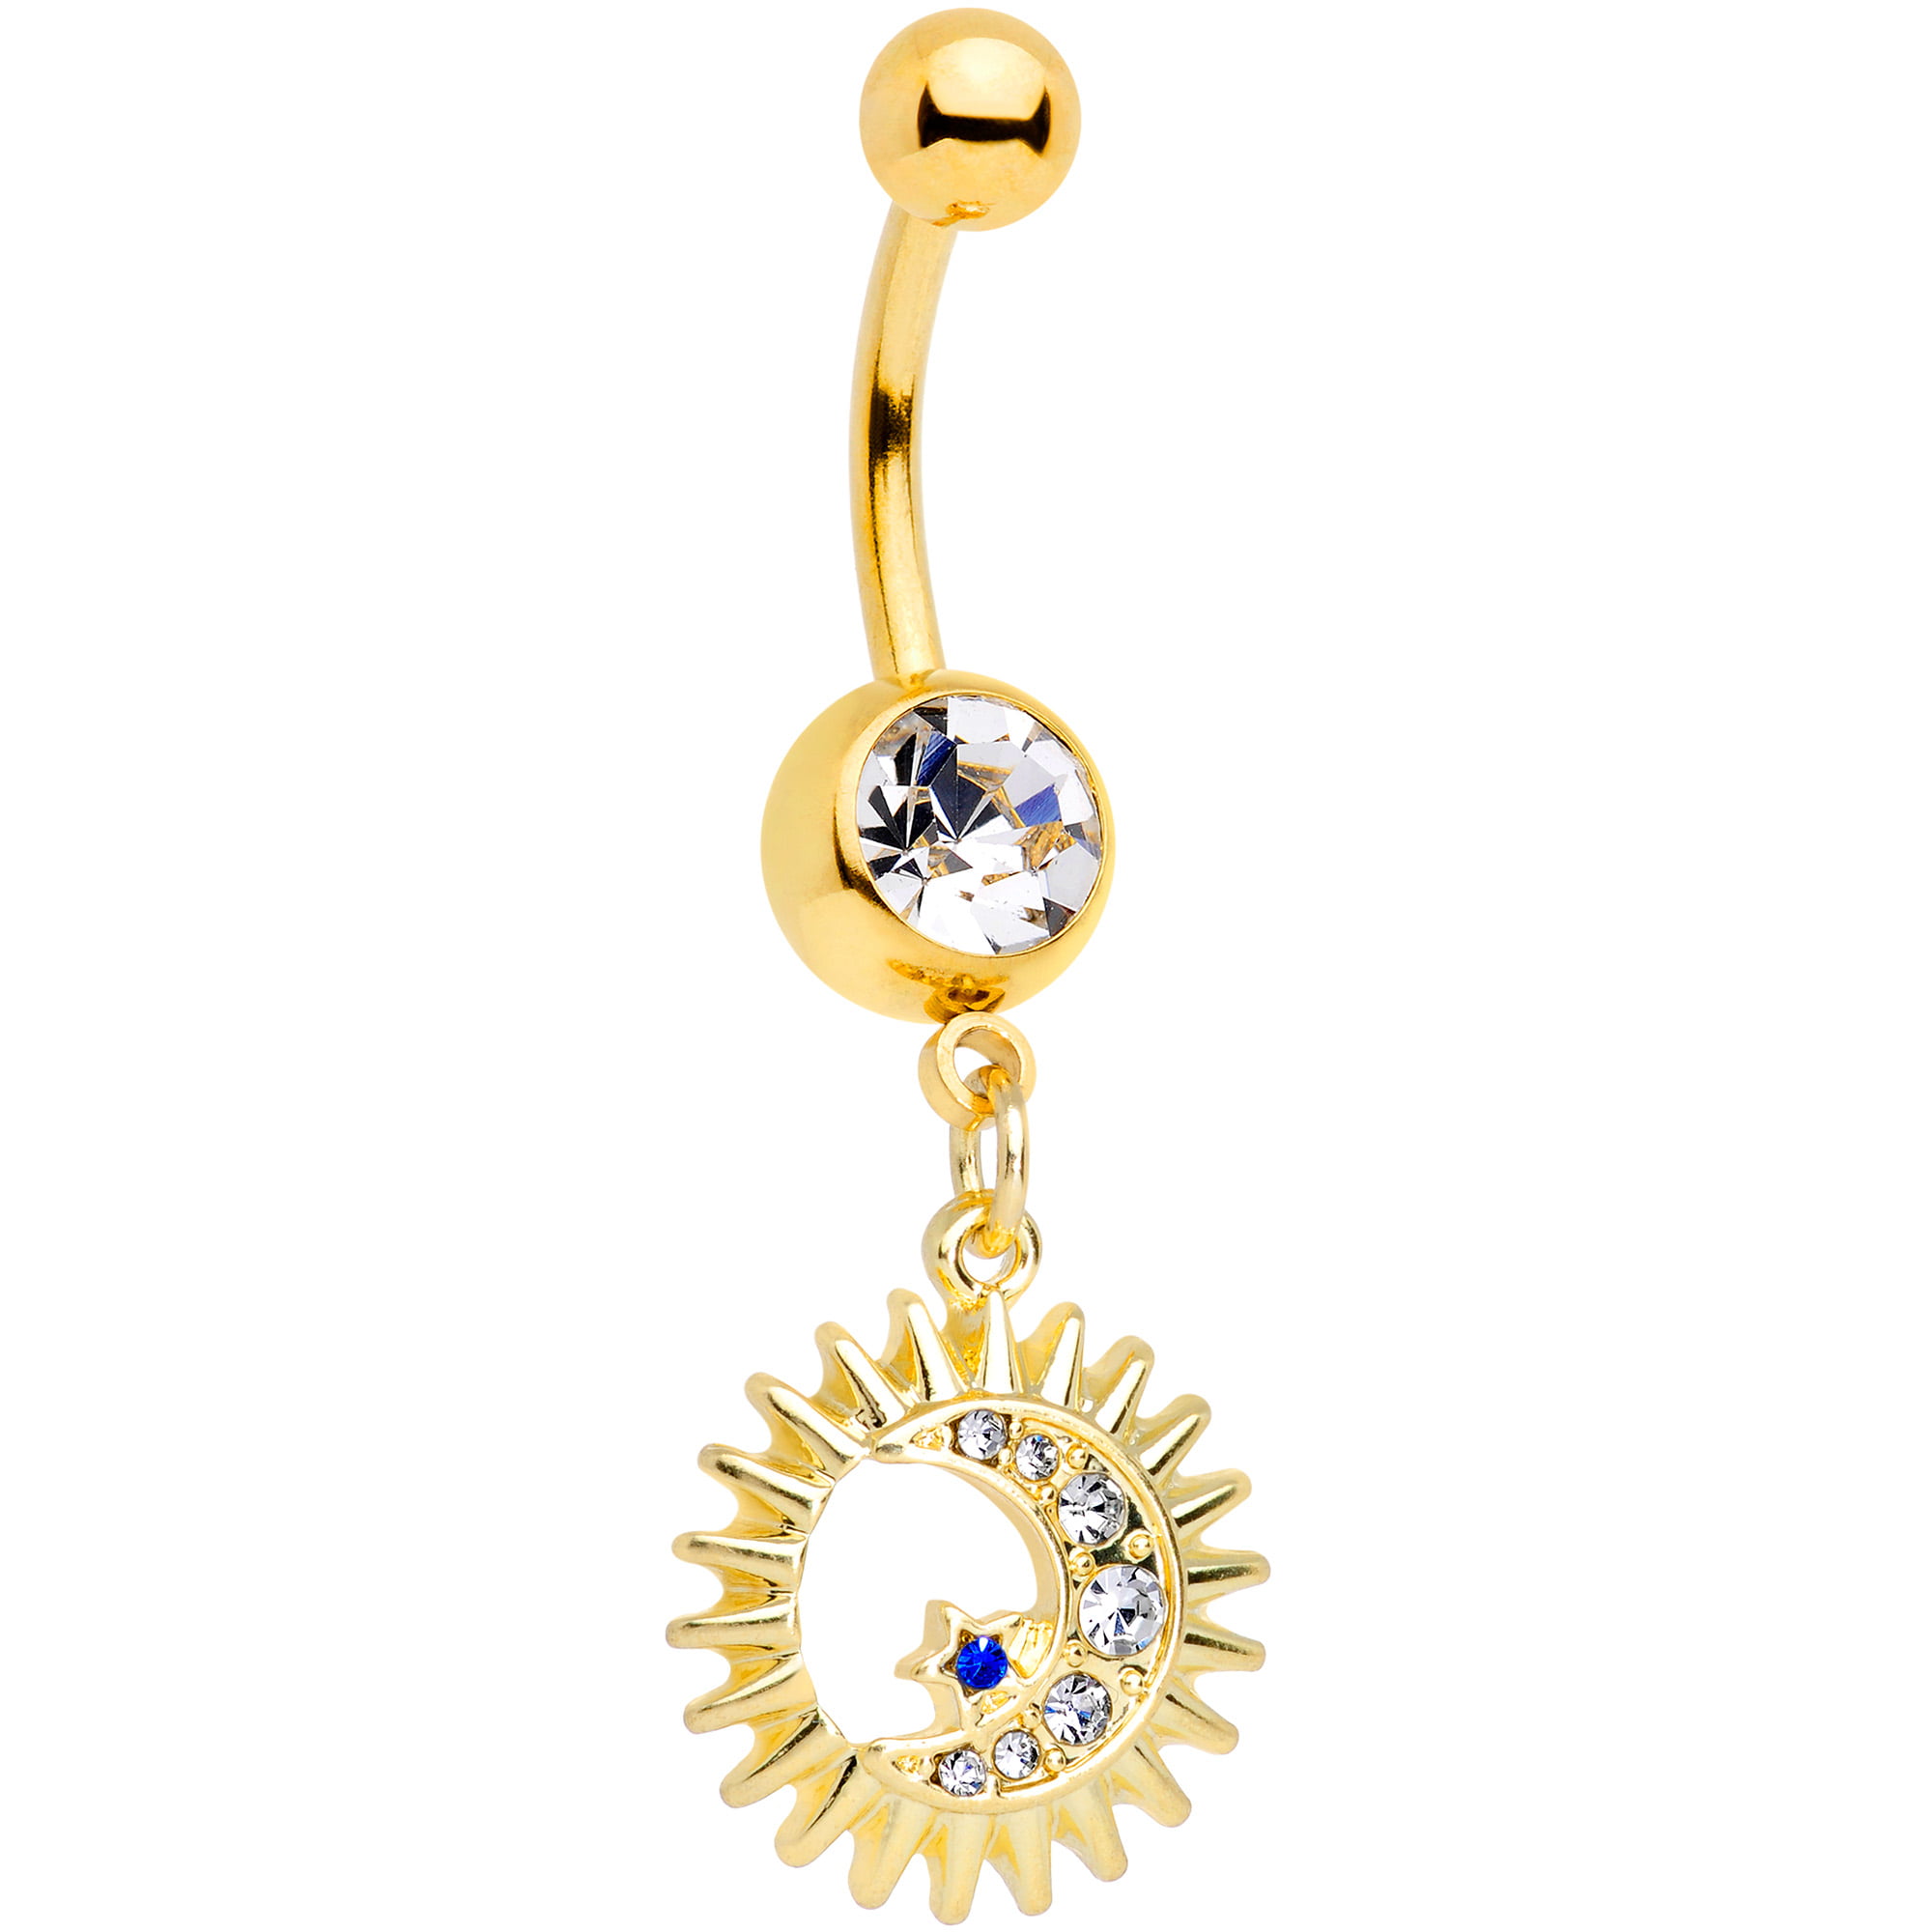 Sun Belly Button Ring Stainless Steel 14G Navel Piercing with Sun Dangle Charm Belly Jewelry